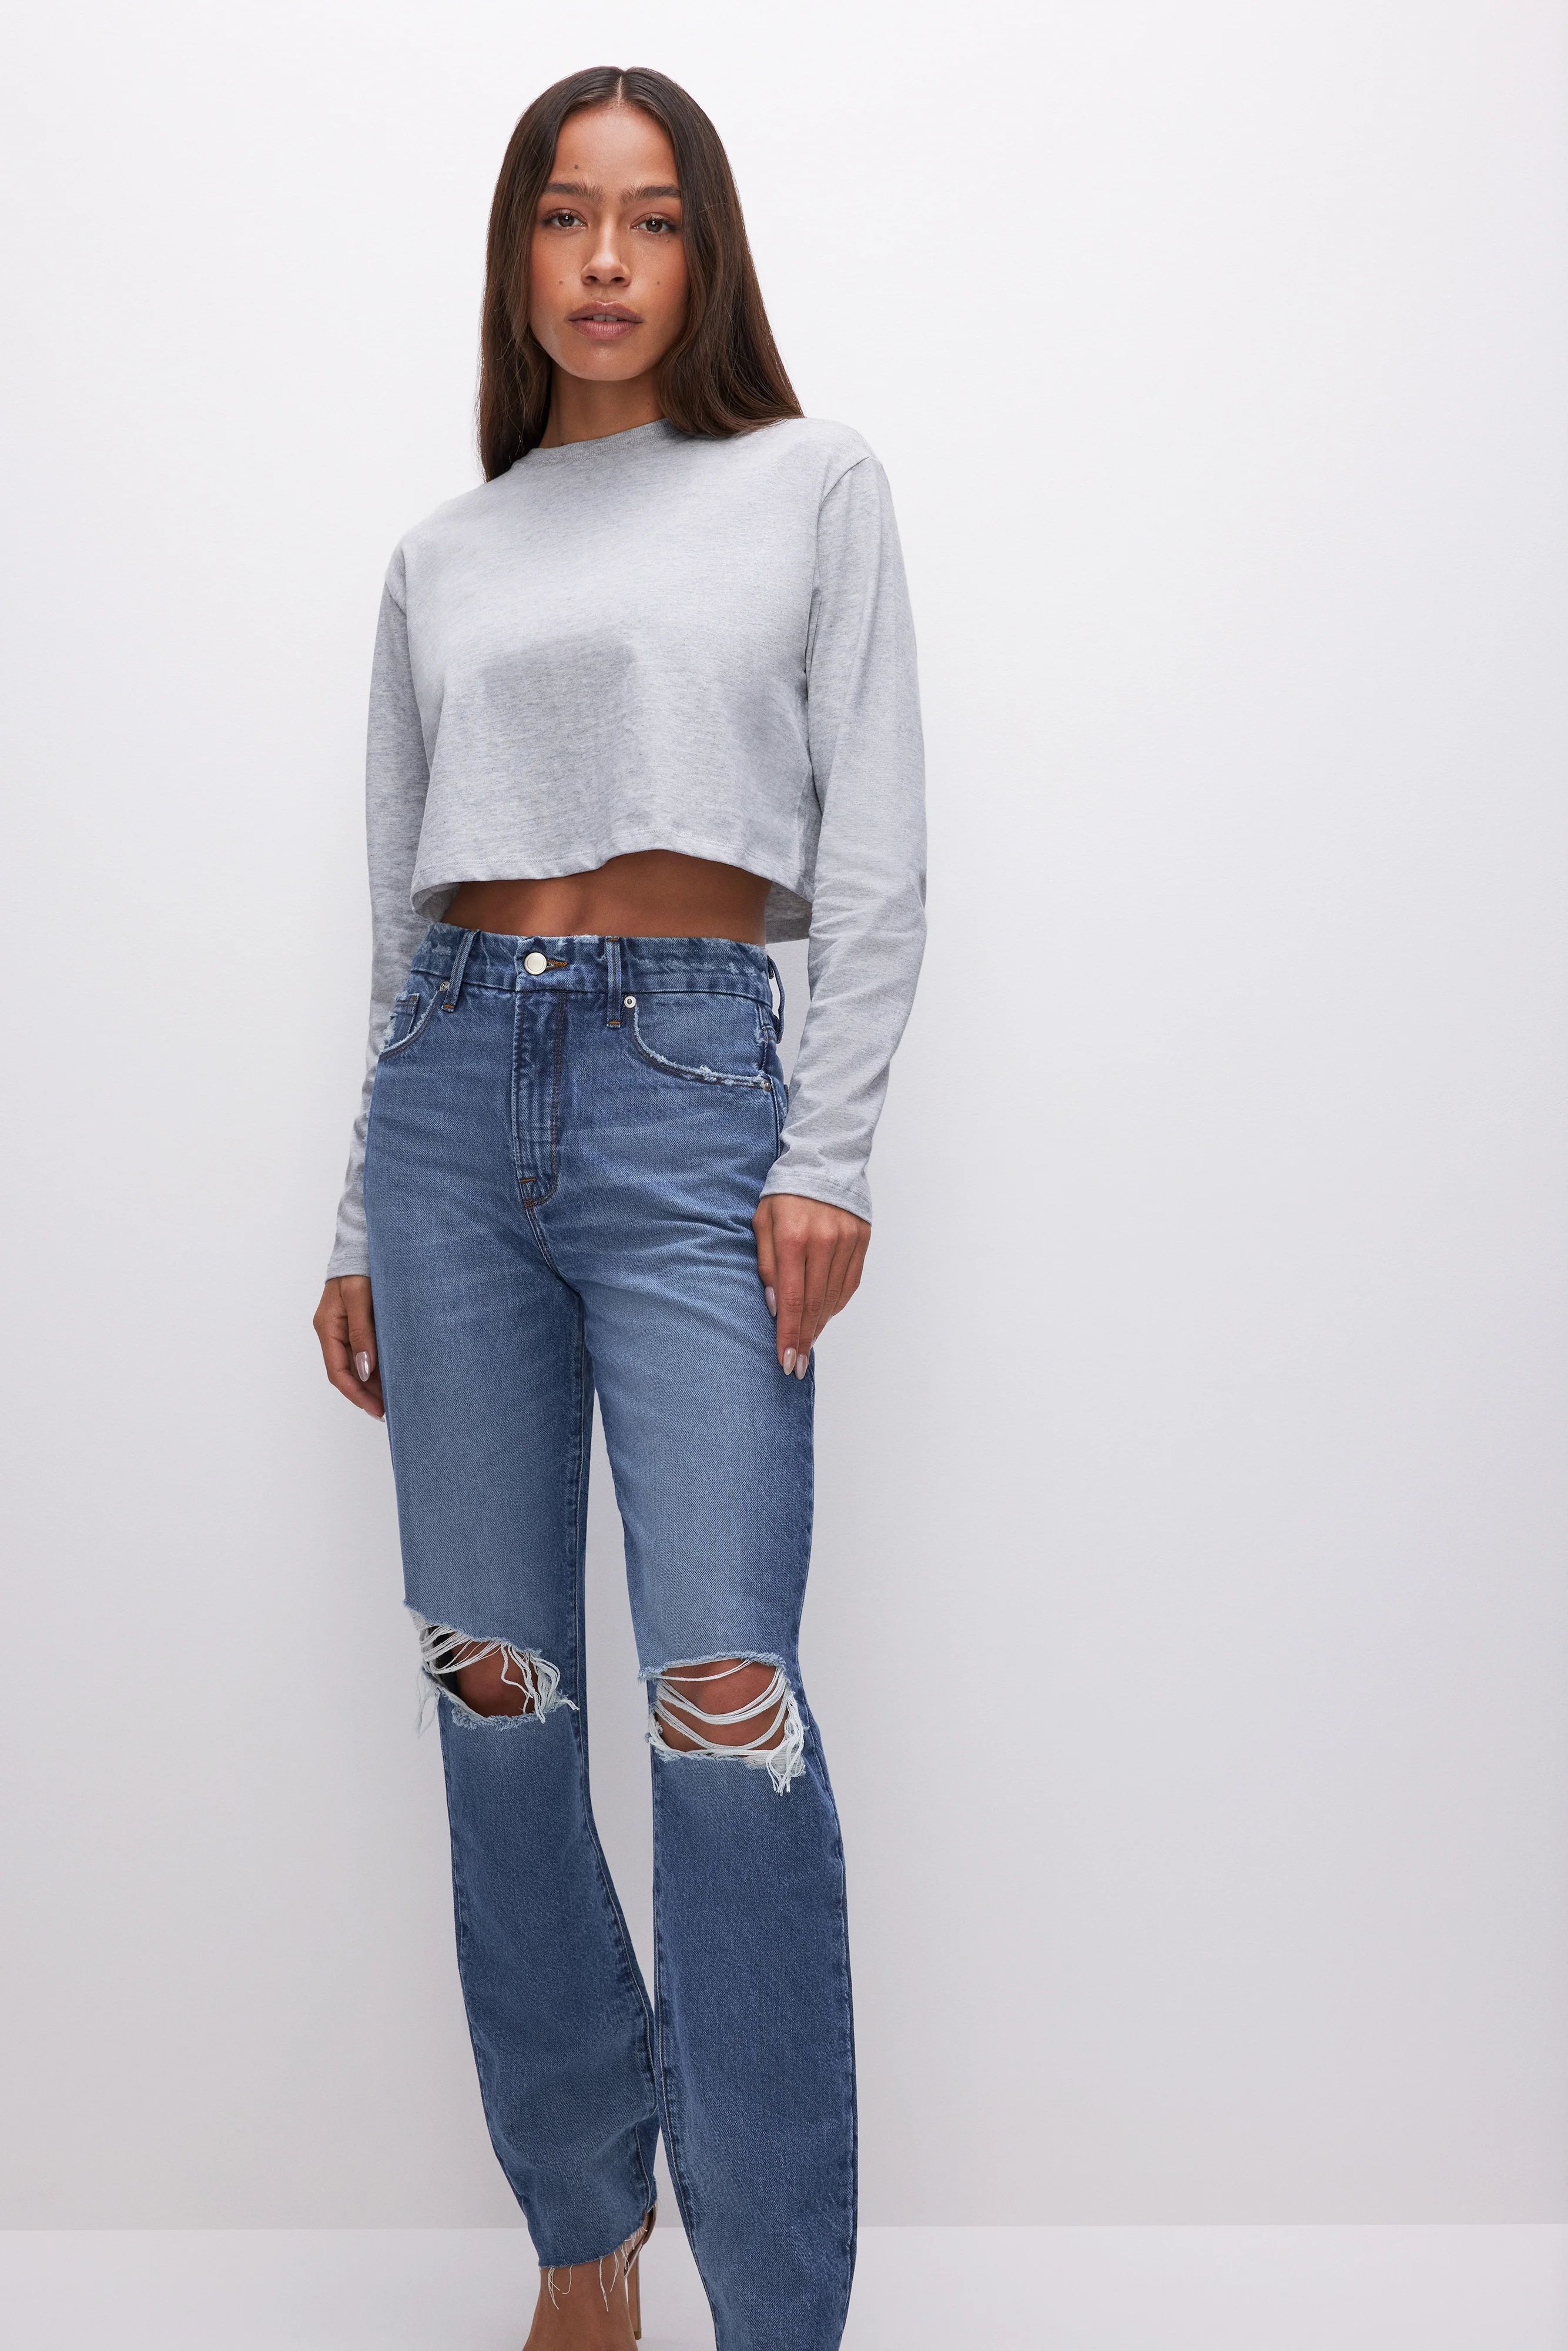 COTTON CROPPED LONG SLEEVE | HEATHER GREY001 - GOOD AMERICAN | Good American